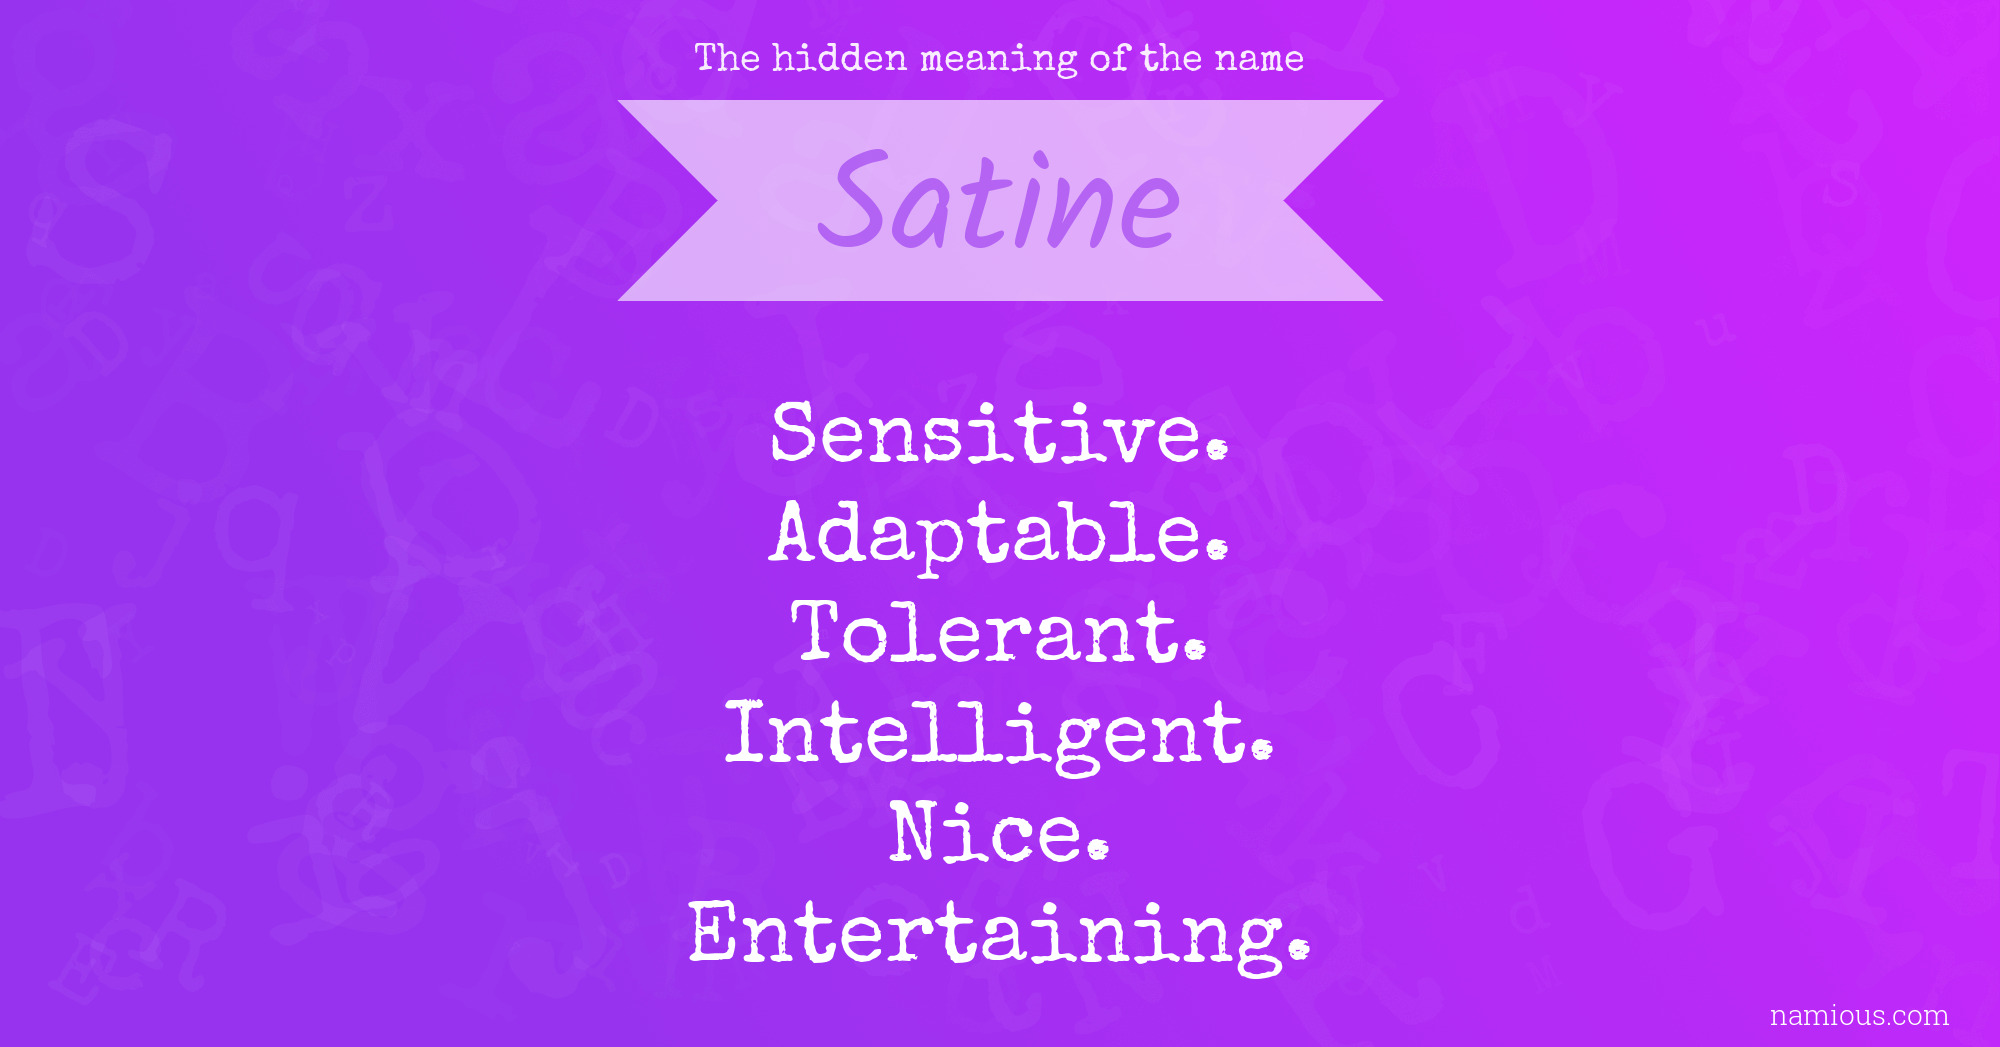 The hidden meaning of the name Satine